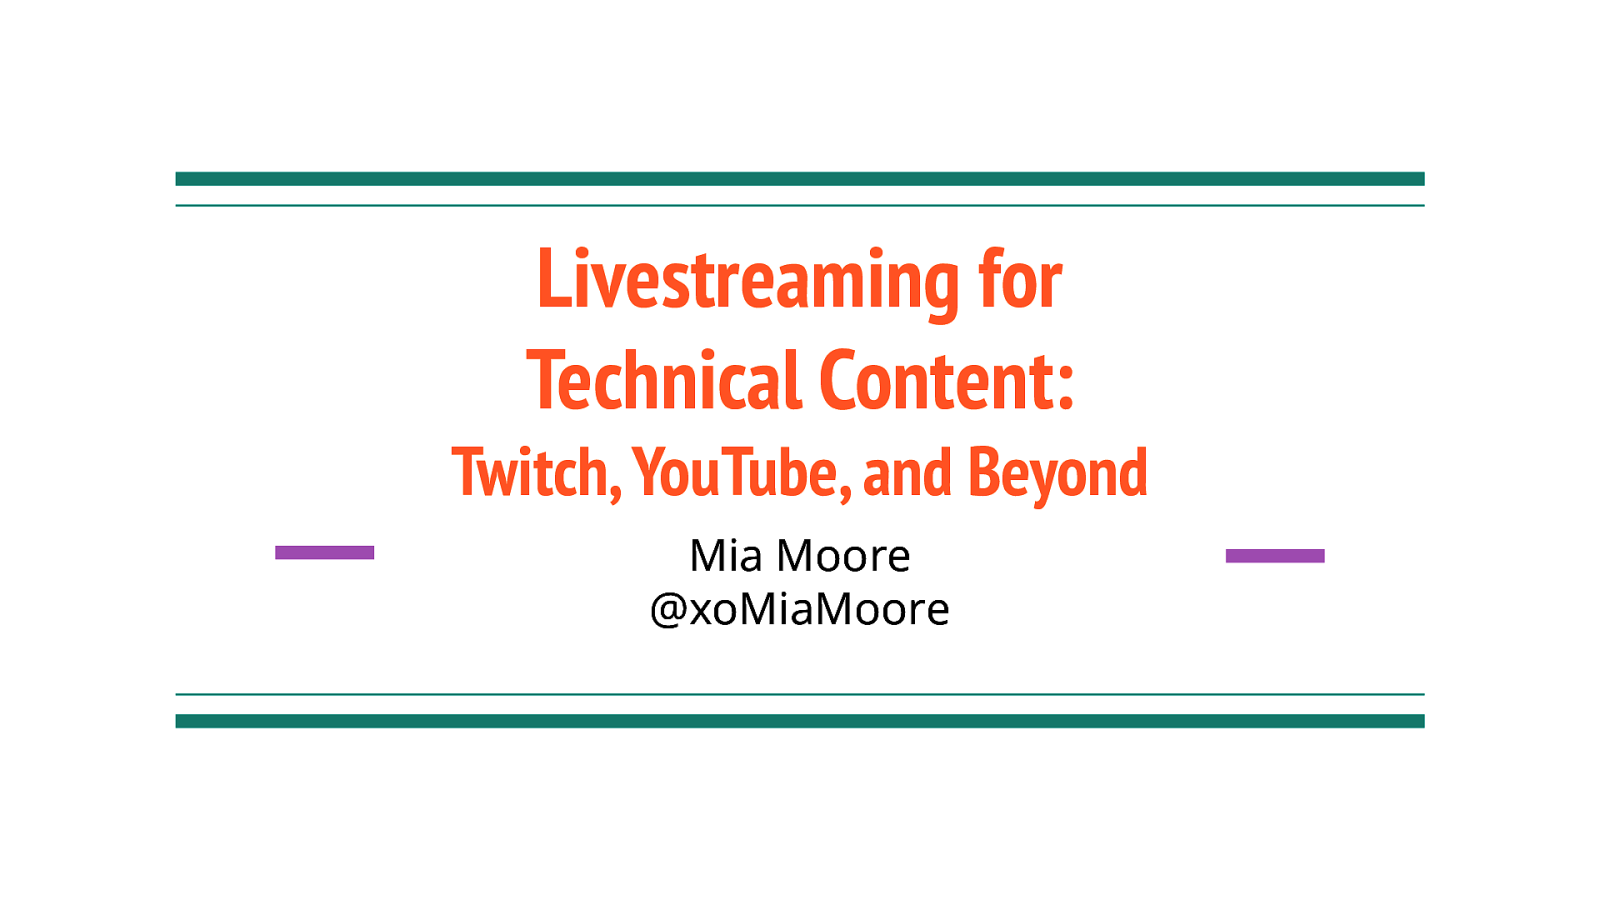 Livestreaming for Technical Content: Twitch, YouTube, and Beyond